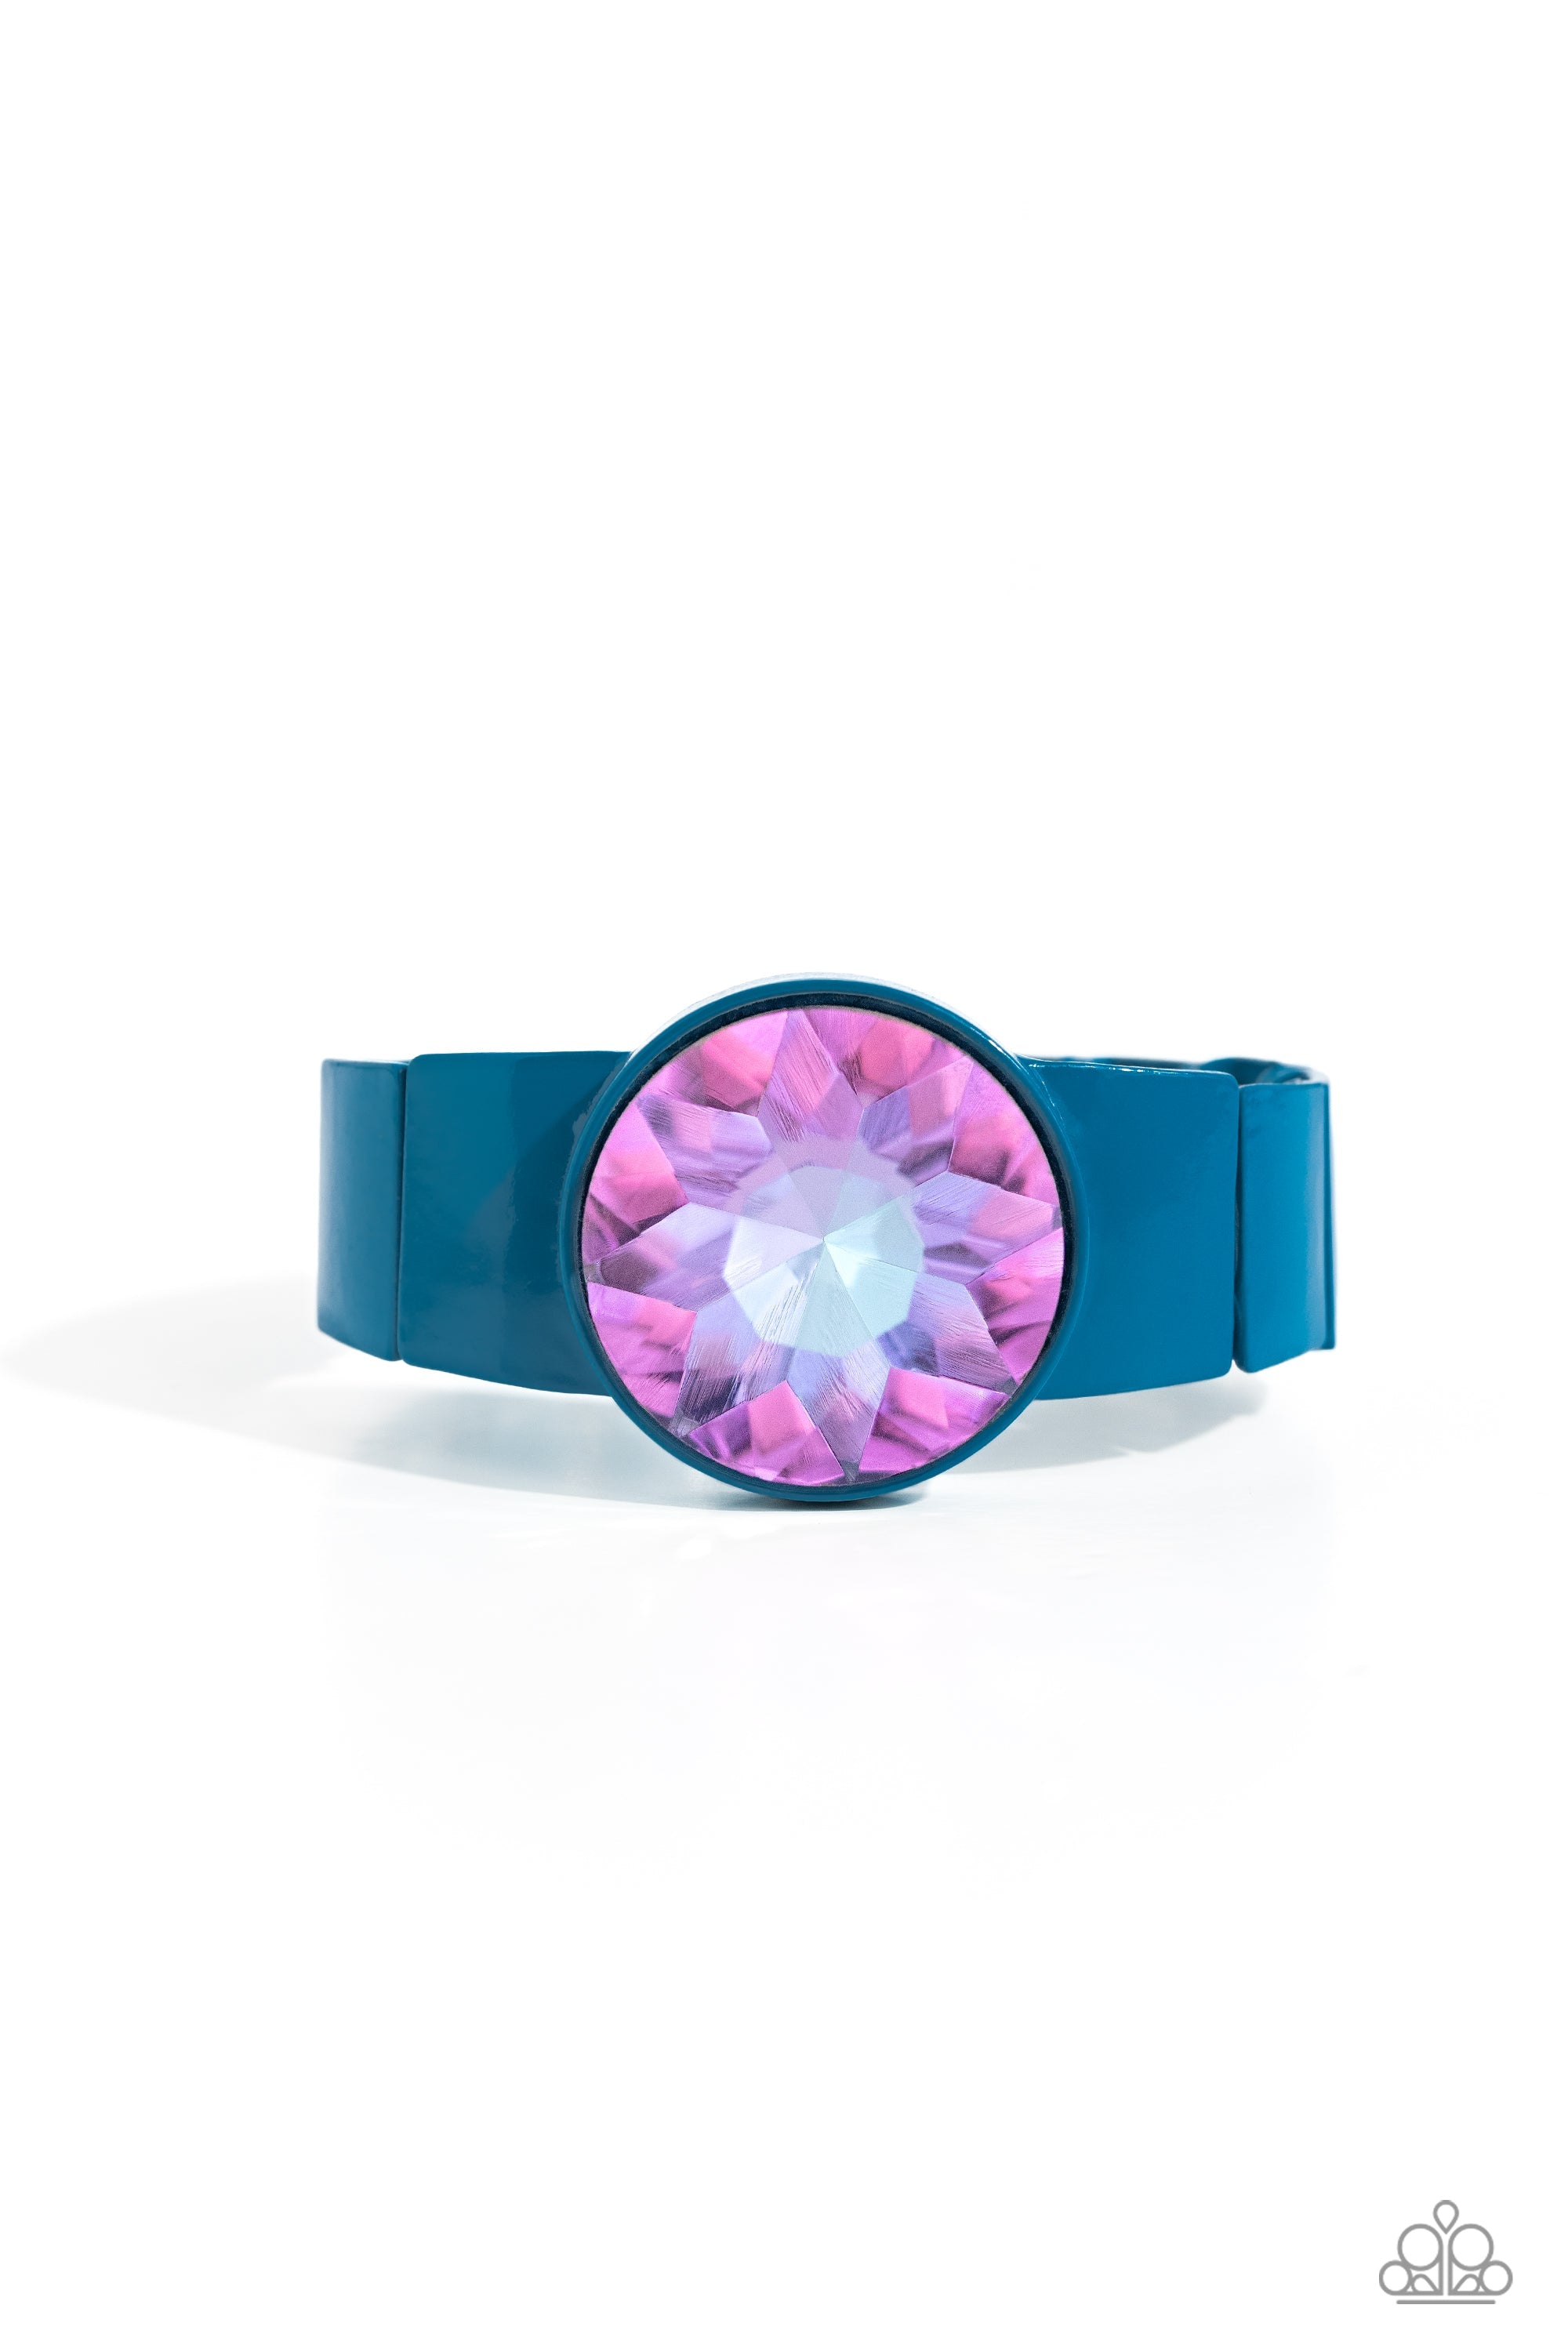 Exaggerated Ego Blue Bracelet - Paparazzi Accessories- lightbox - CarasShop.com - $5 Jewelry by Cara Jewels